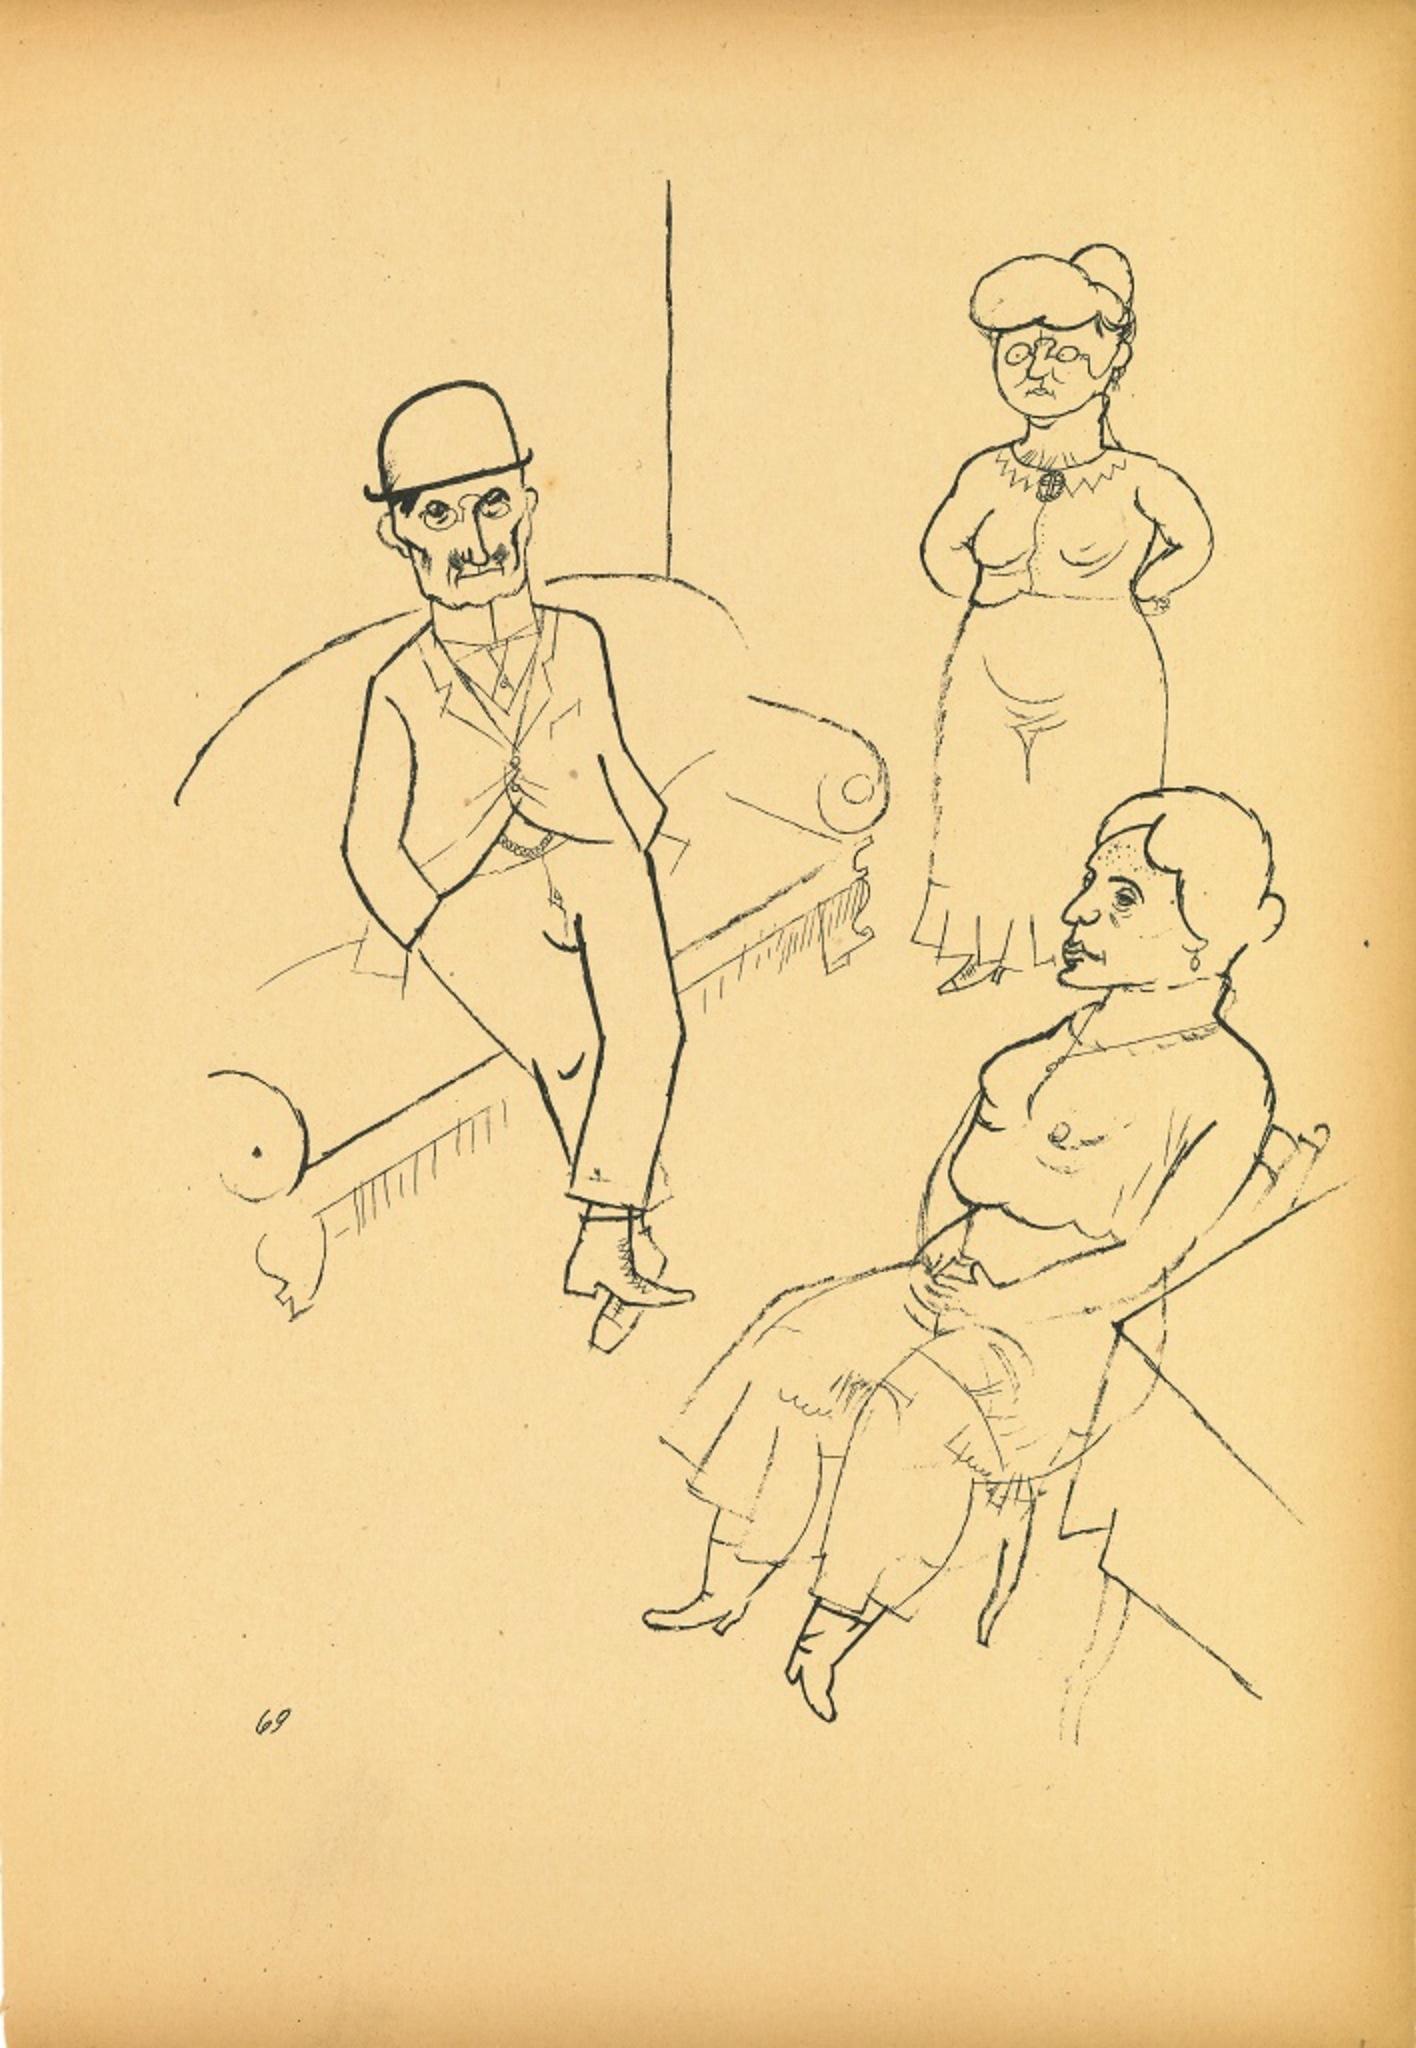 George Grosz Figurative Print - Conversation from Ecce Homo - Original Offset and Lithograph by G. Grosz - 1923